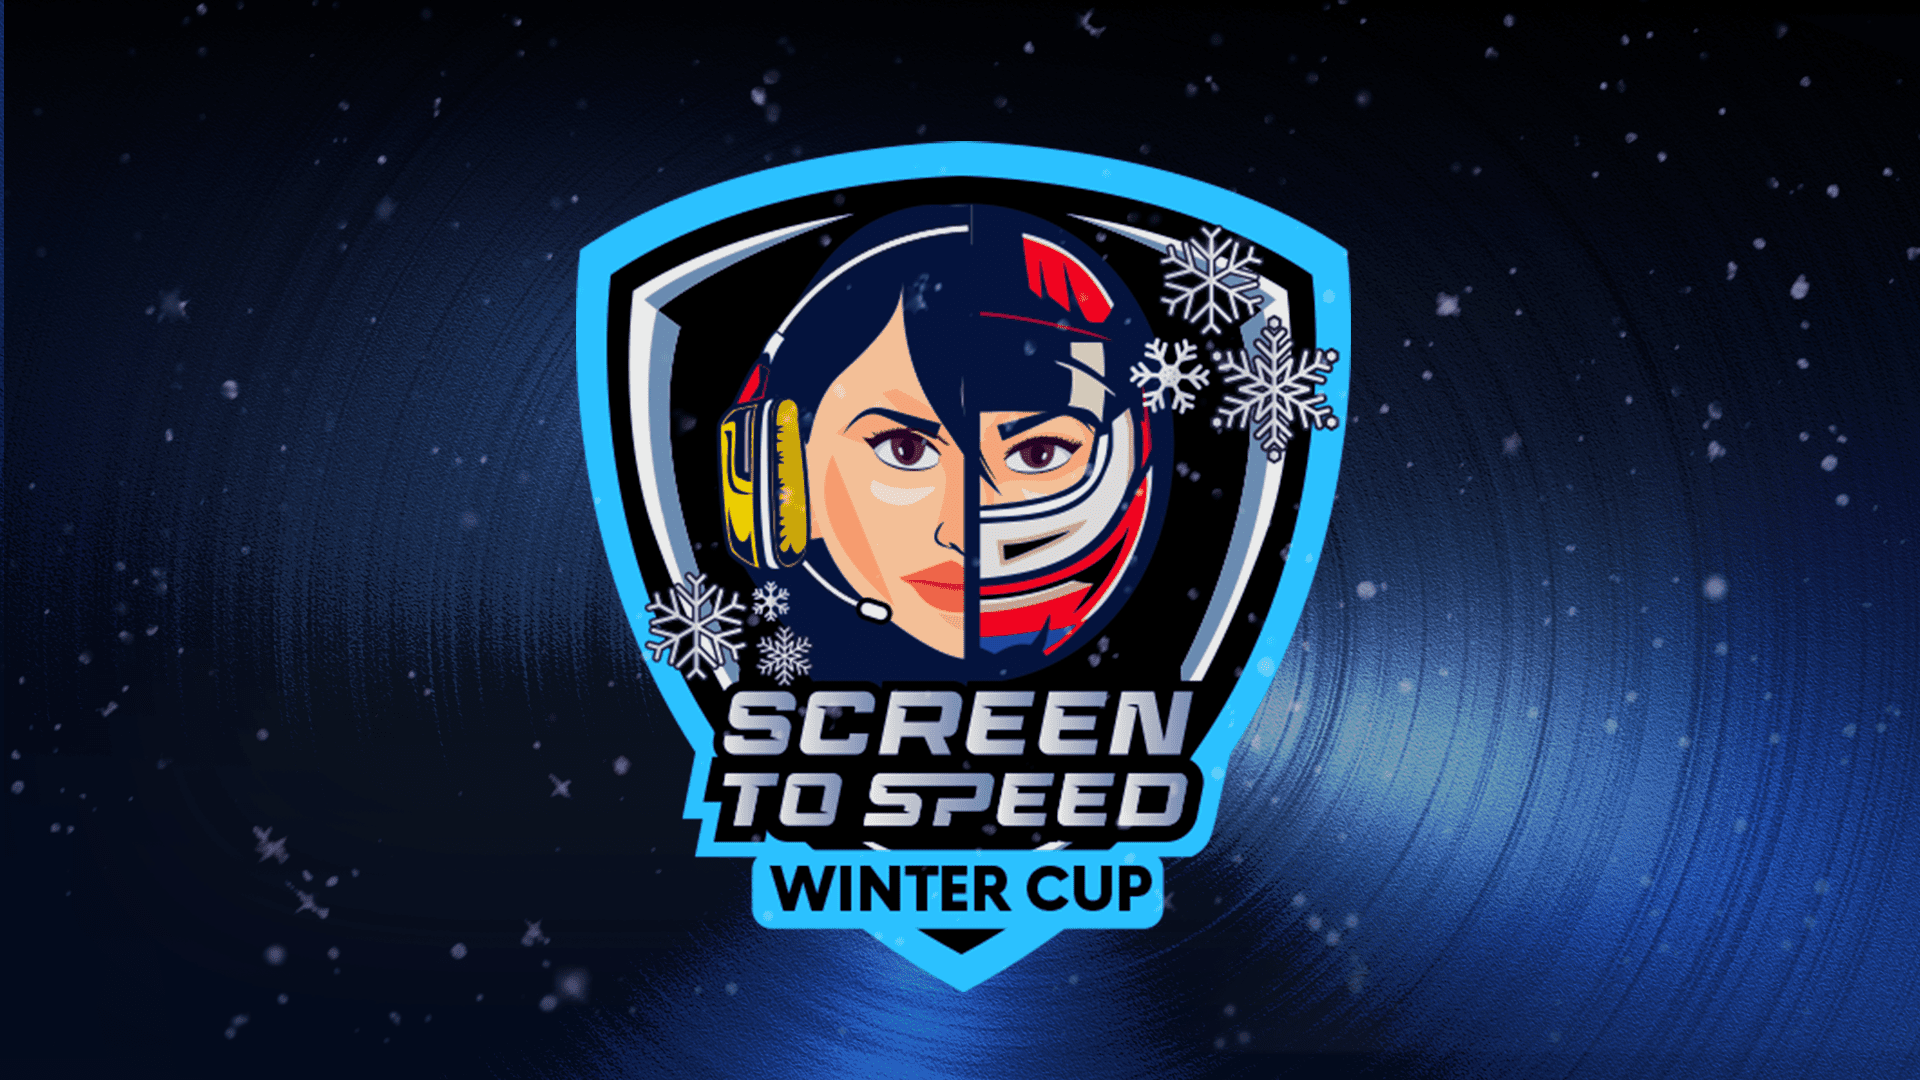 The logo for the Screen to Speed Winter Cup.